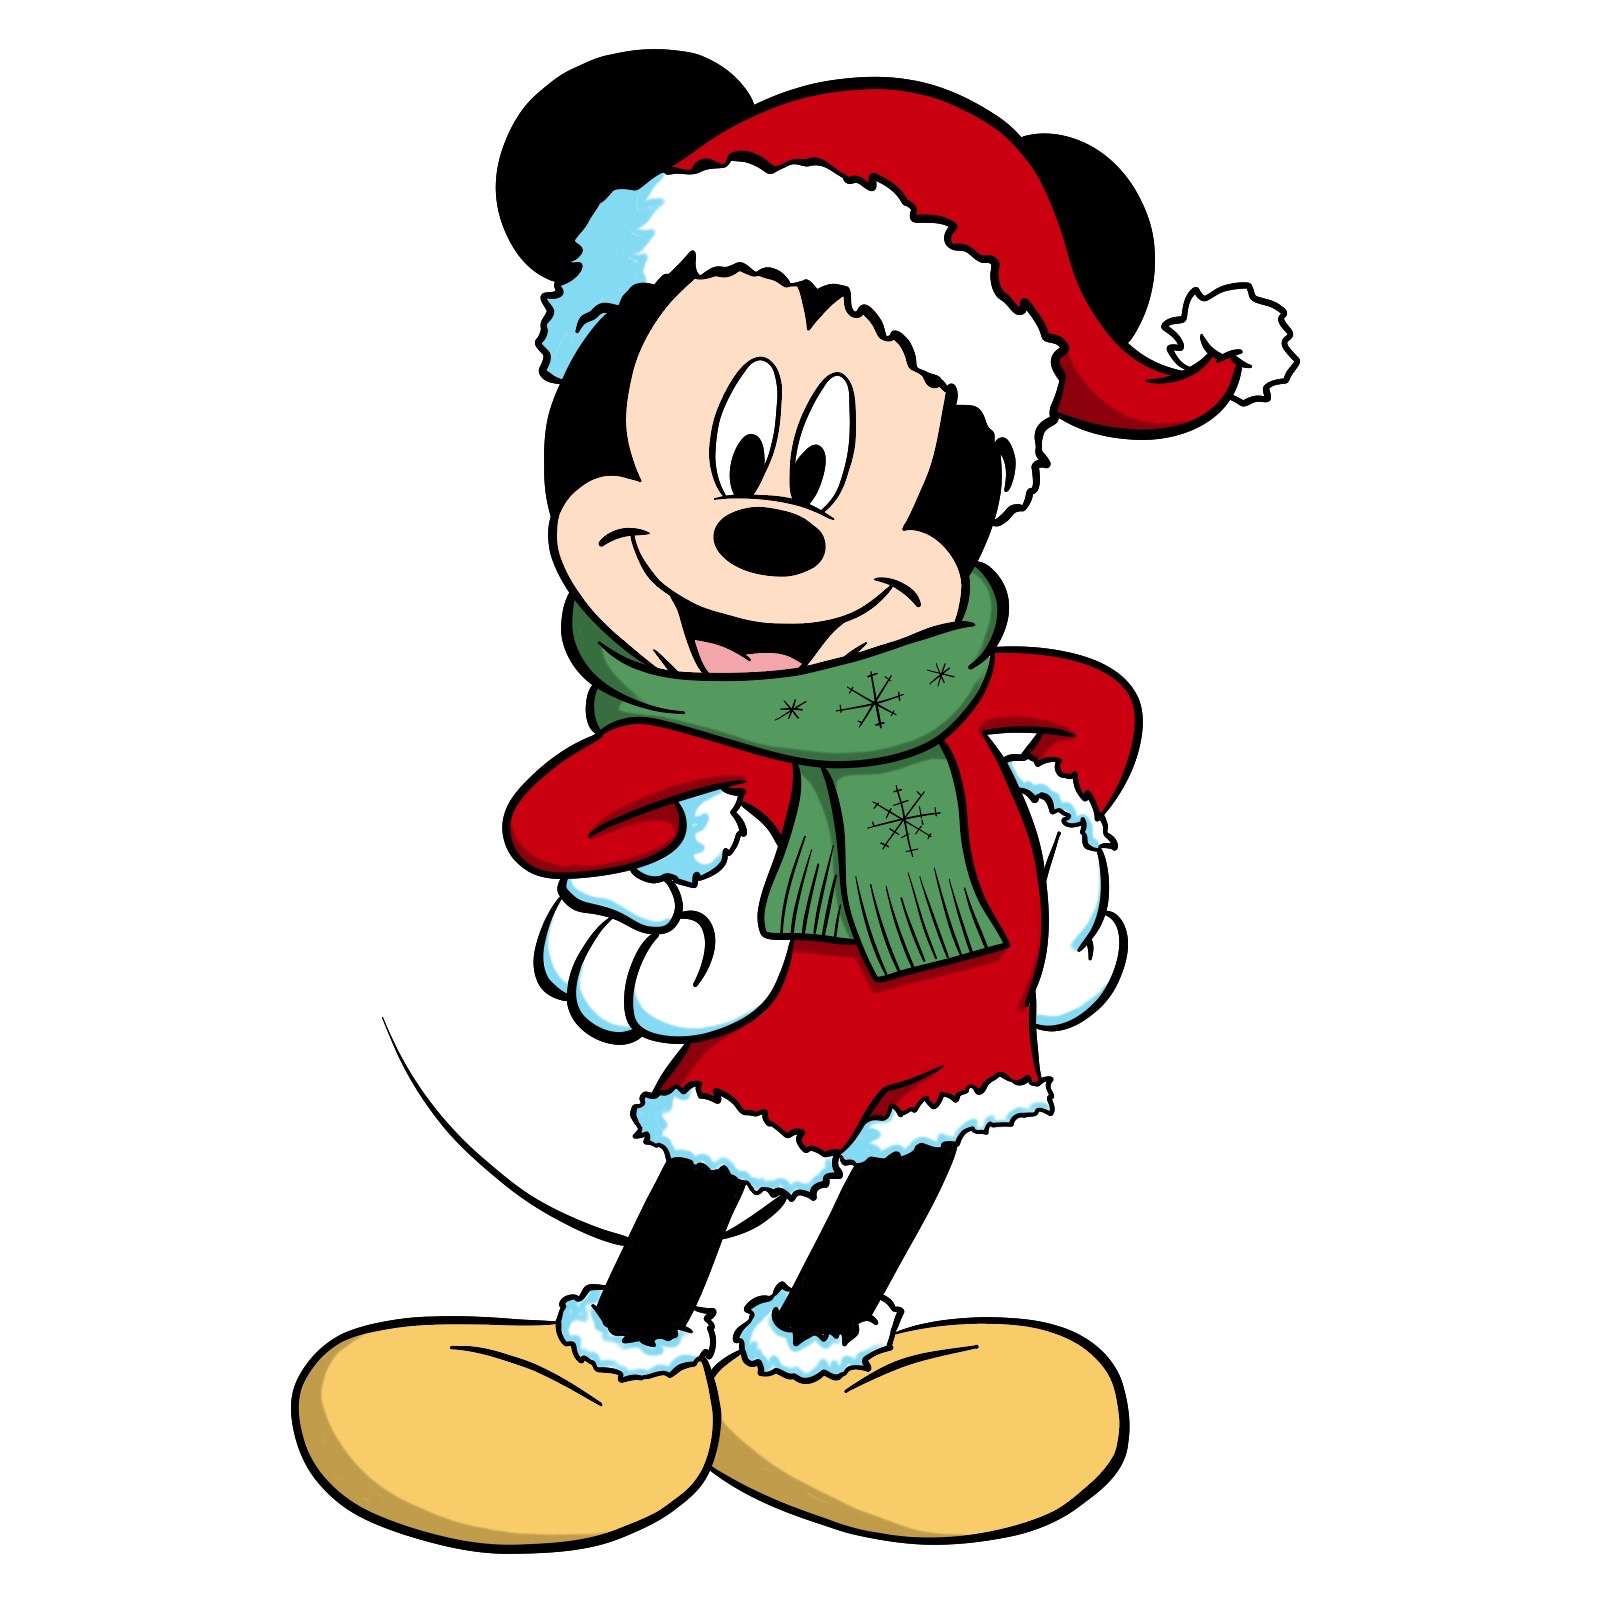 How to draw Santa Mickey Mouse - final step